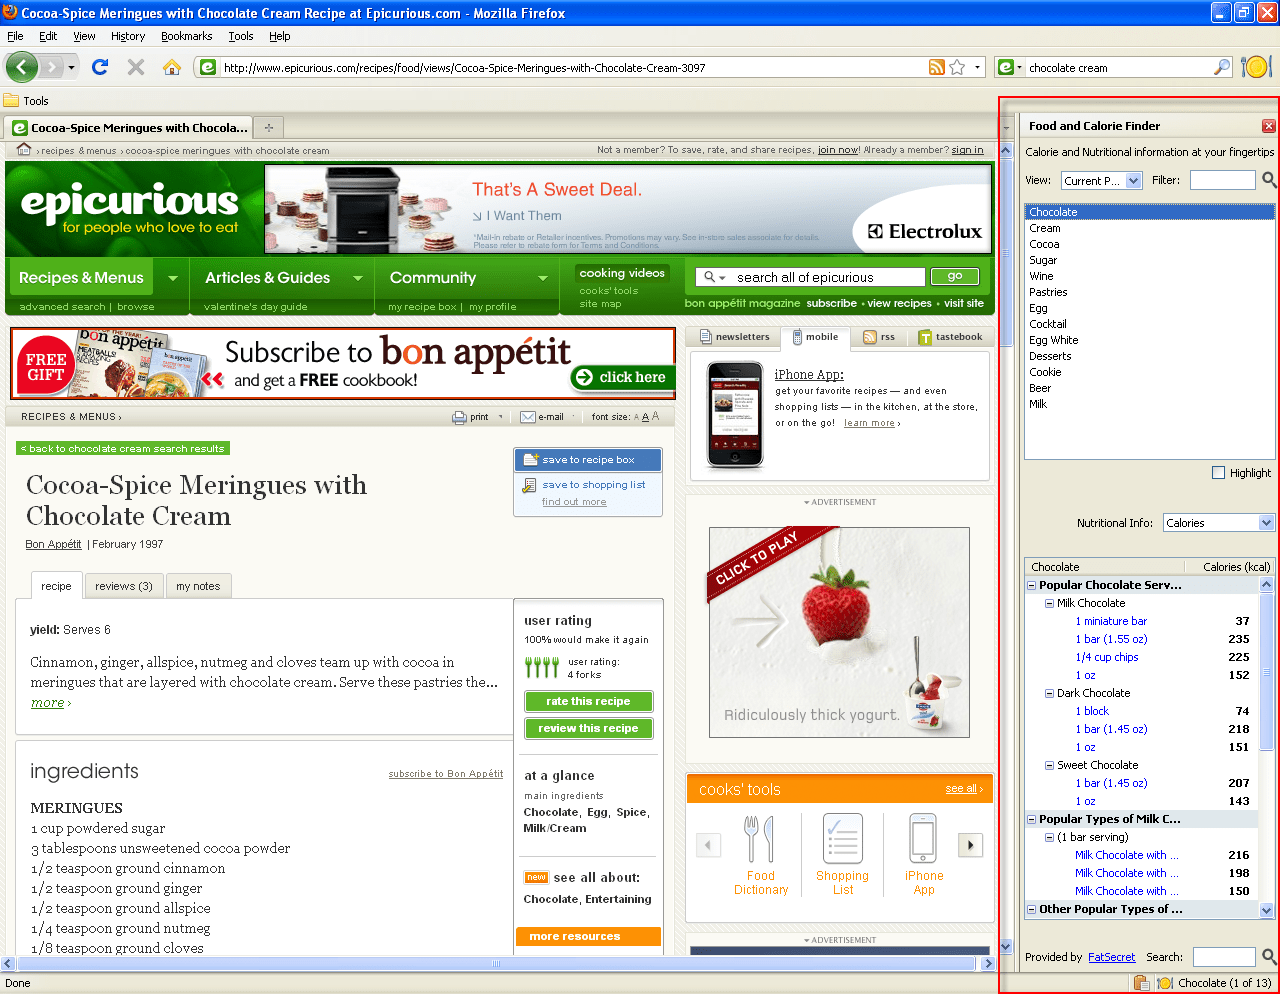 Food and Calorie Finder